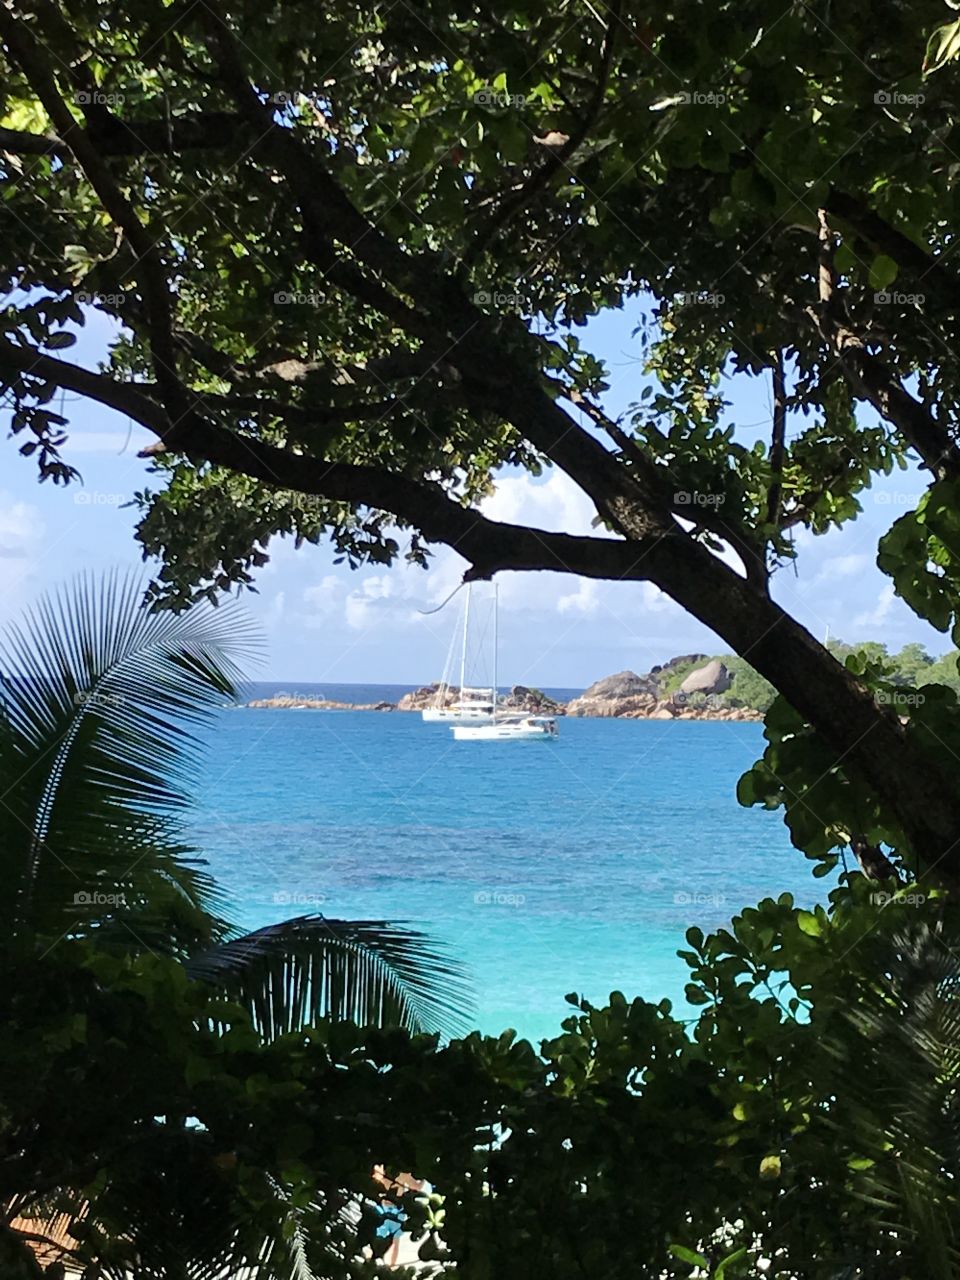 View through trees and catch a look on catamaran, lying in a bay on the Seychelles